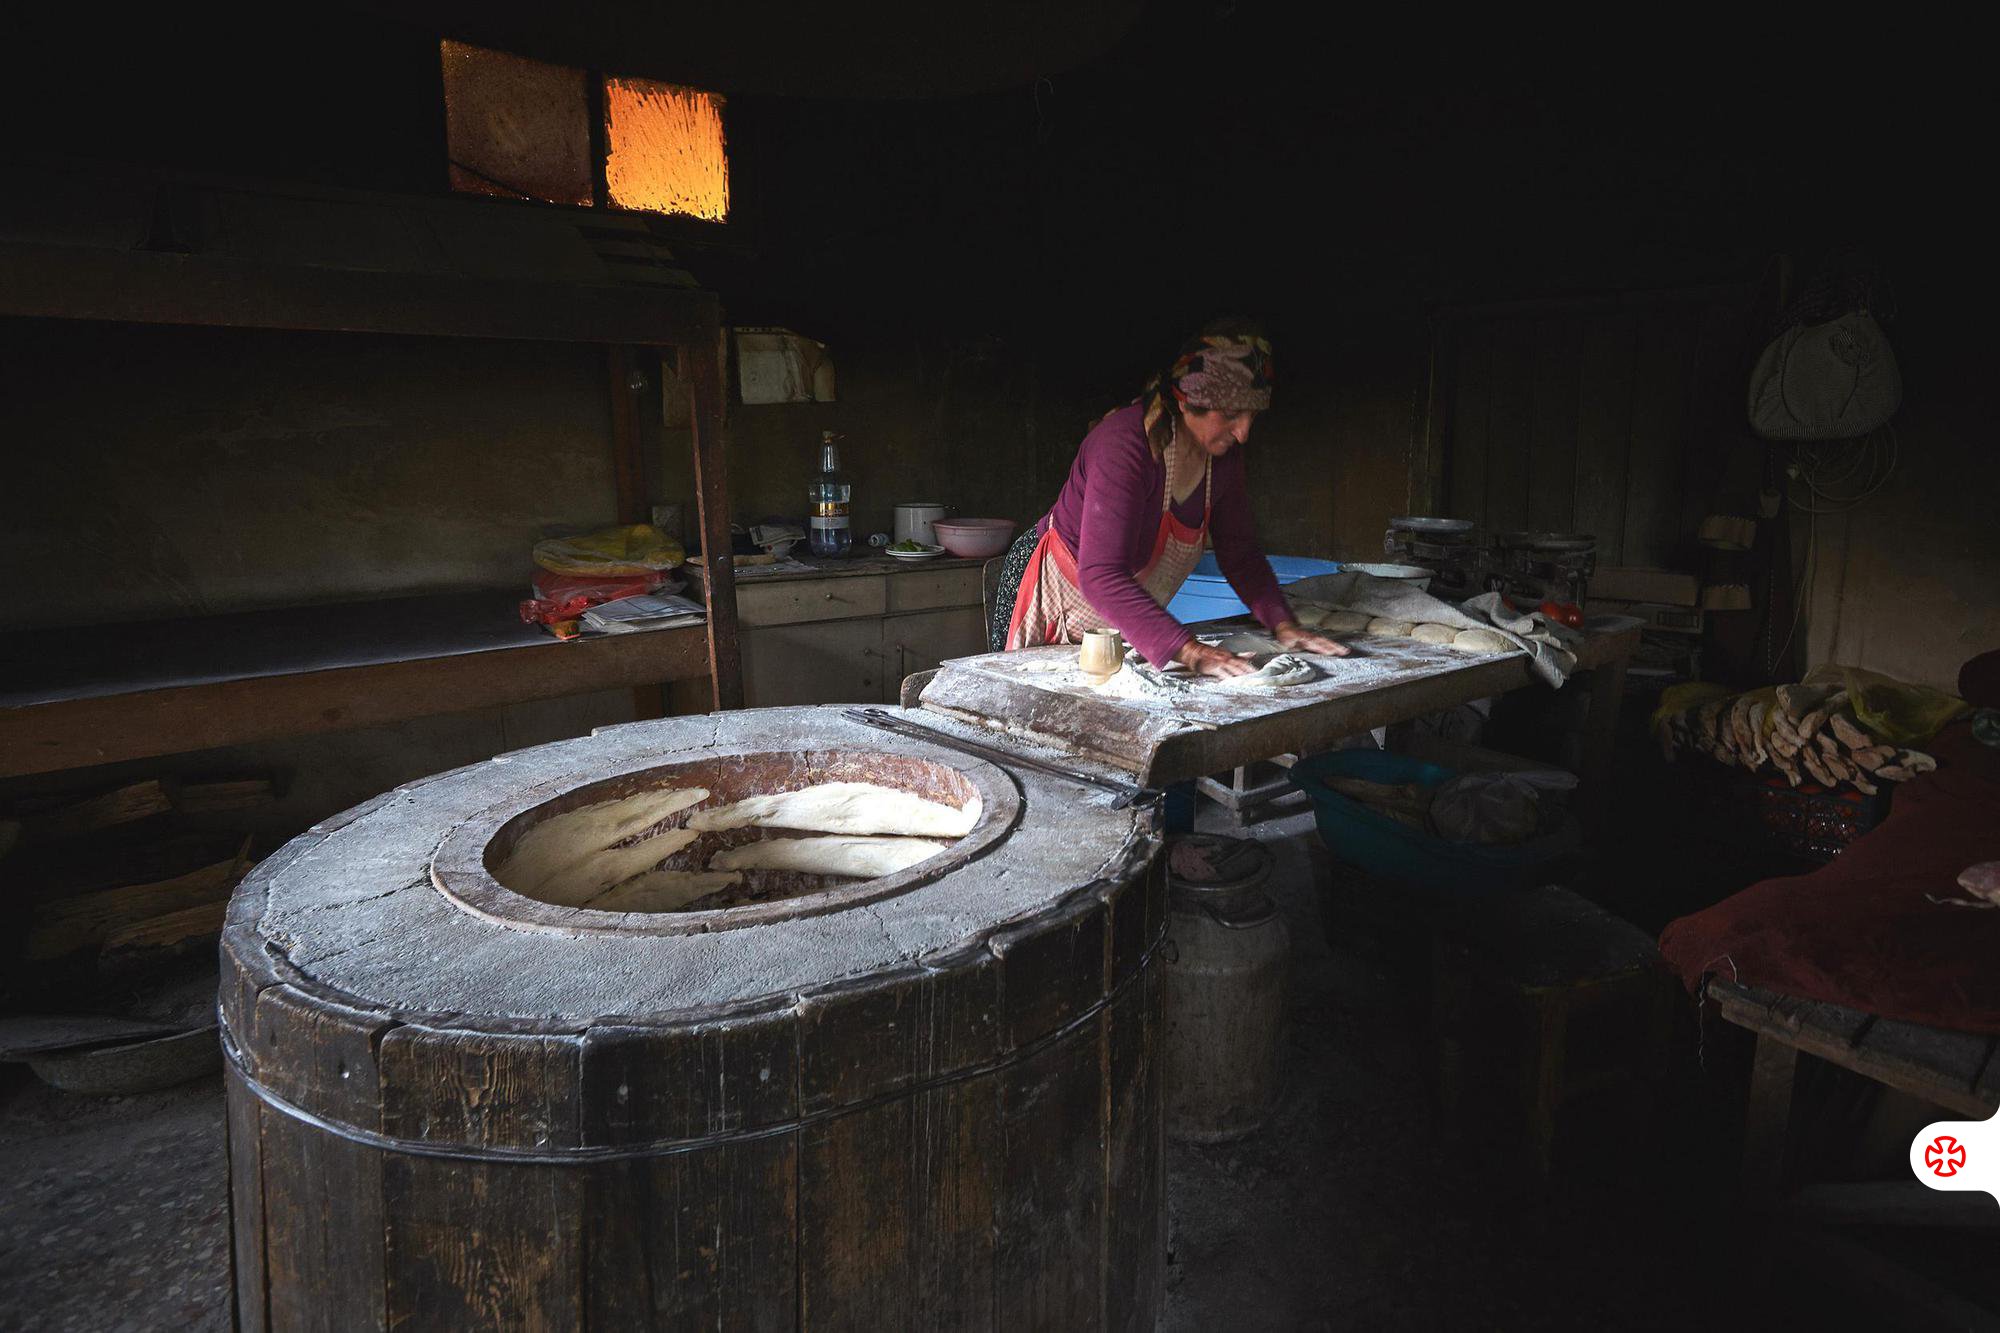 Georgian woman makes traditional bread in old round tandoor oven in Kakheti rural village